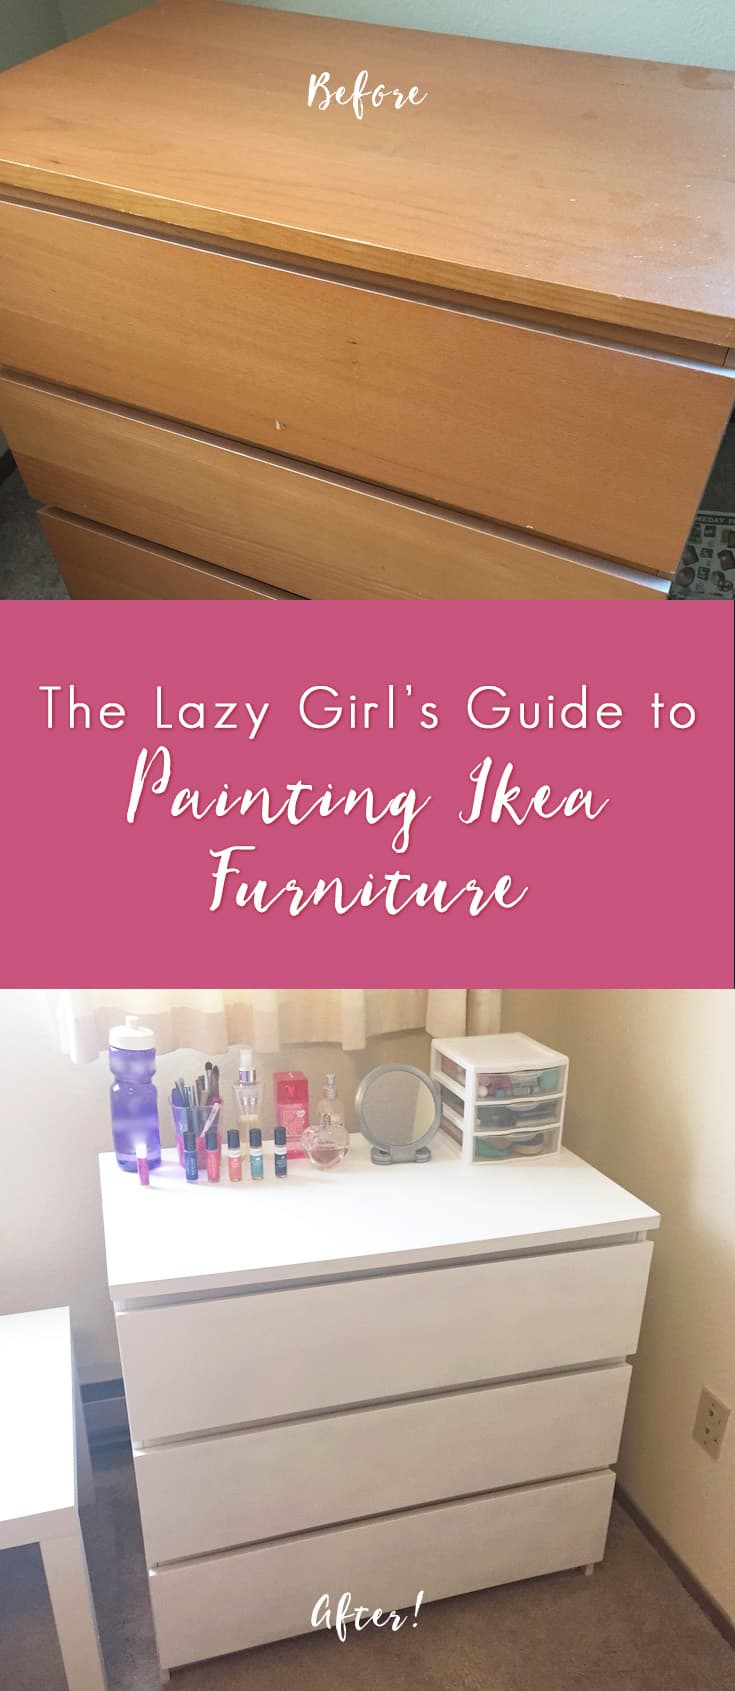 Guide to Painting Ikea Furniture